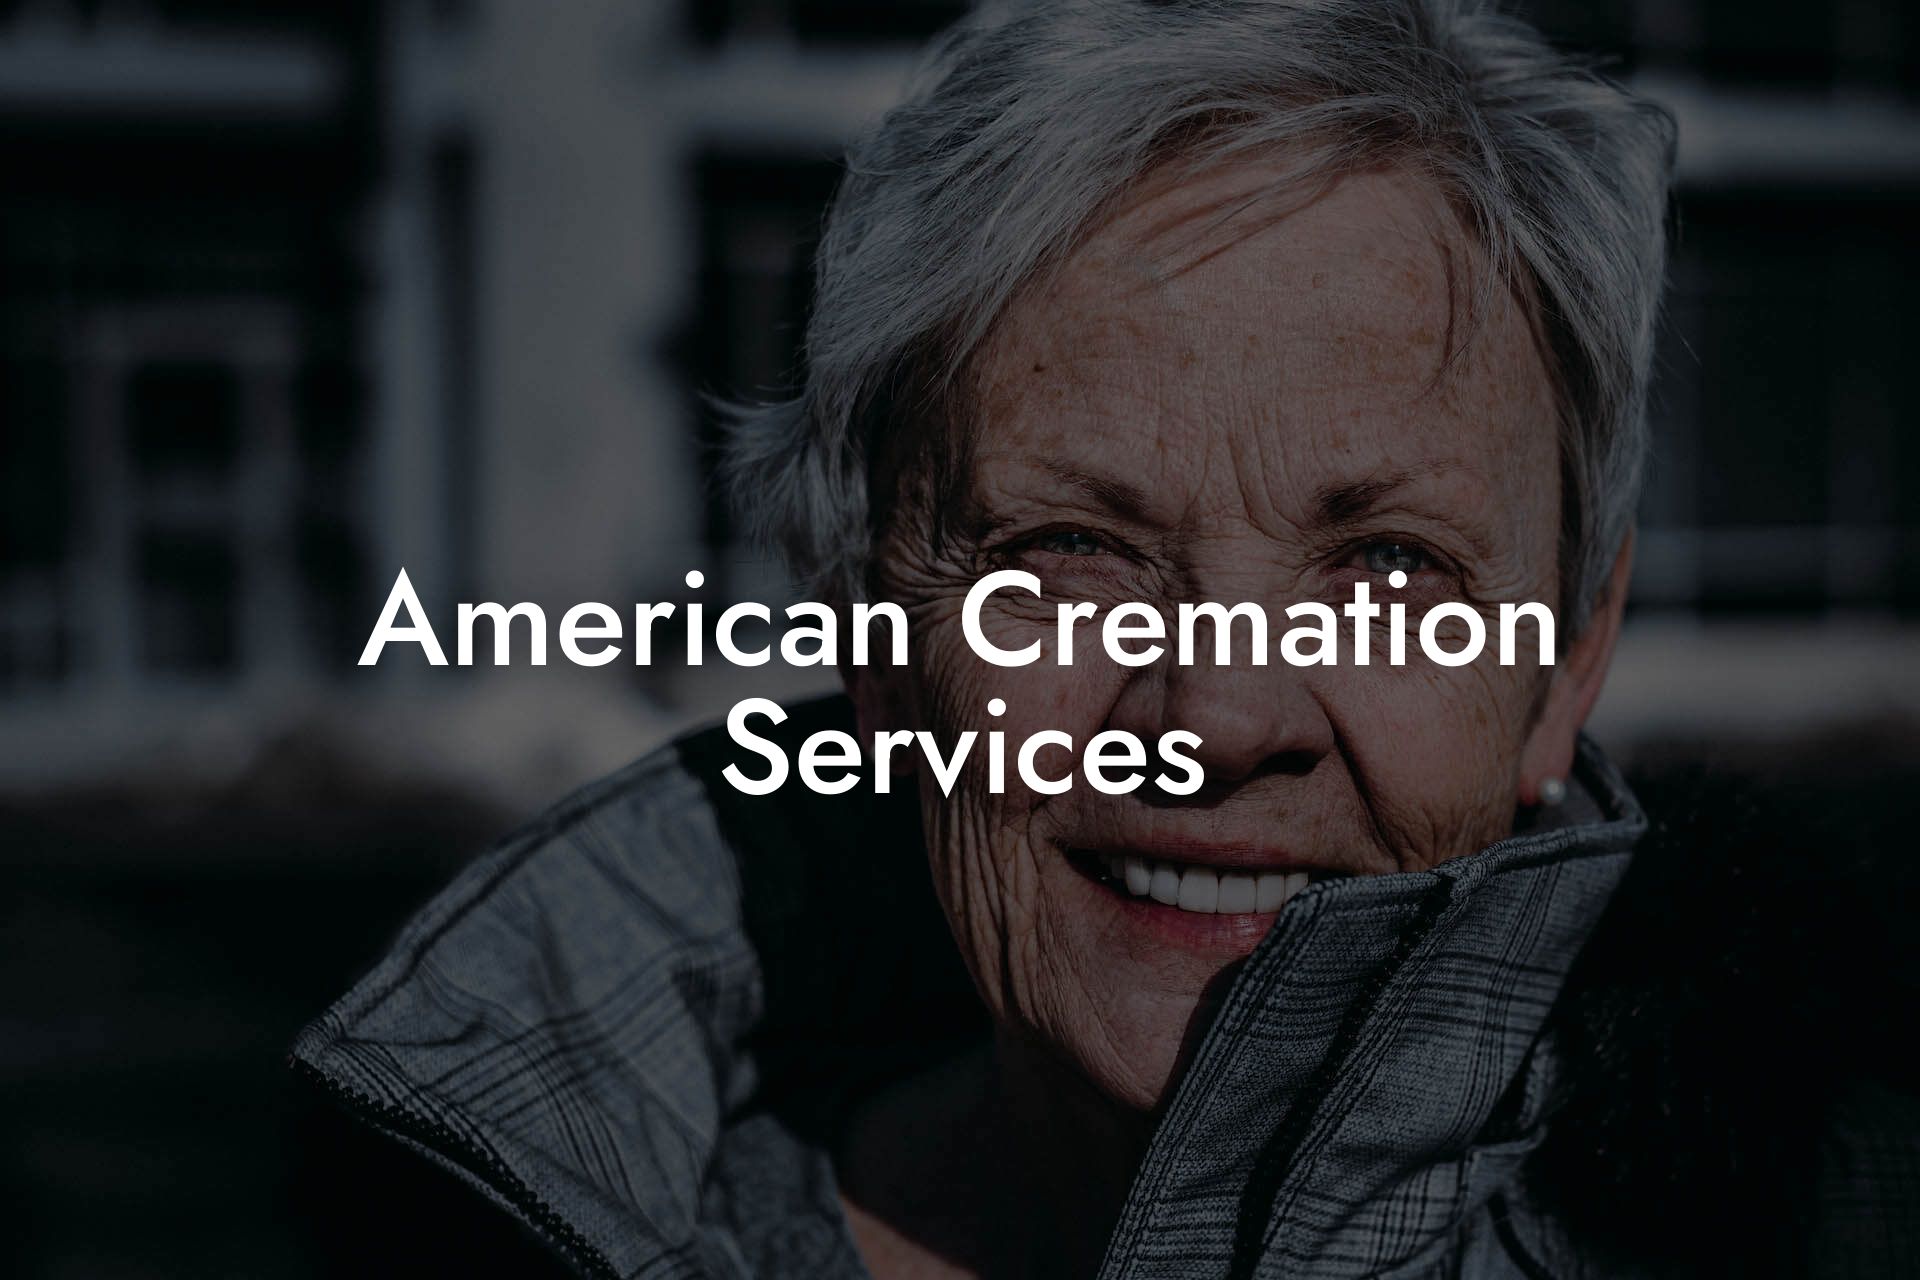 American Cremation Services